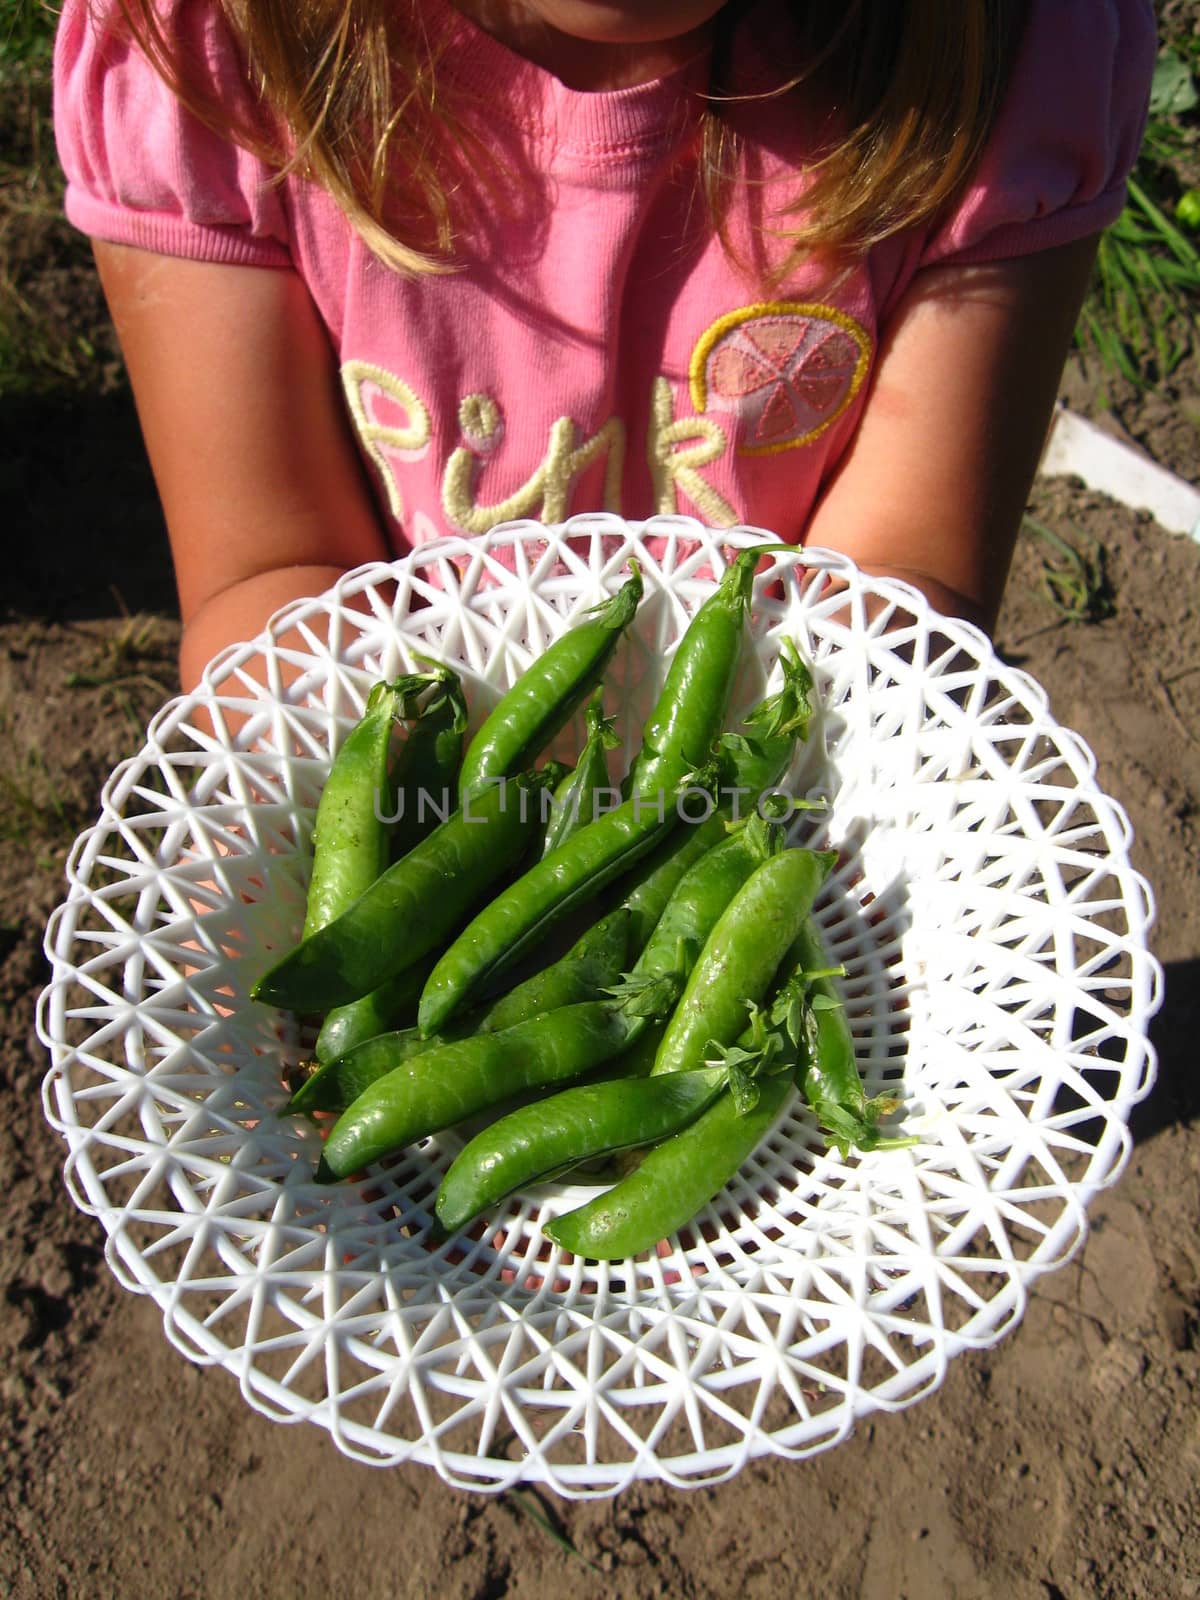 little girl proposing fresh peas in the plate